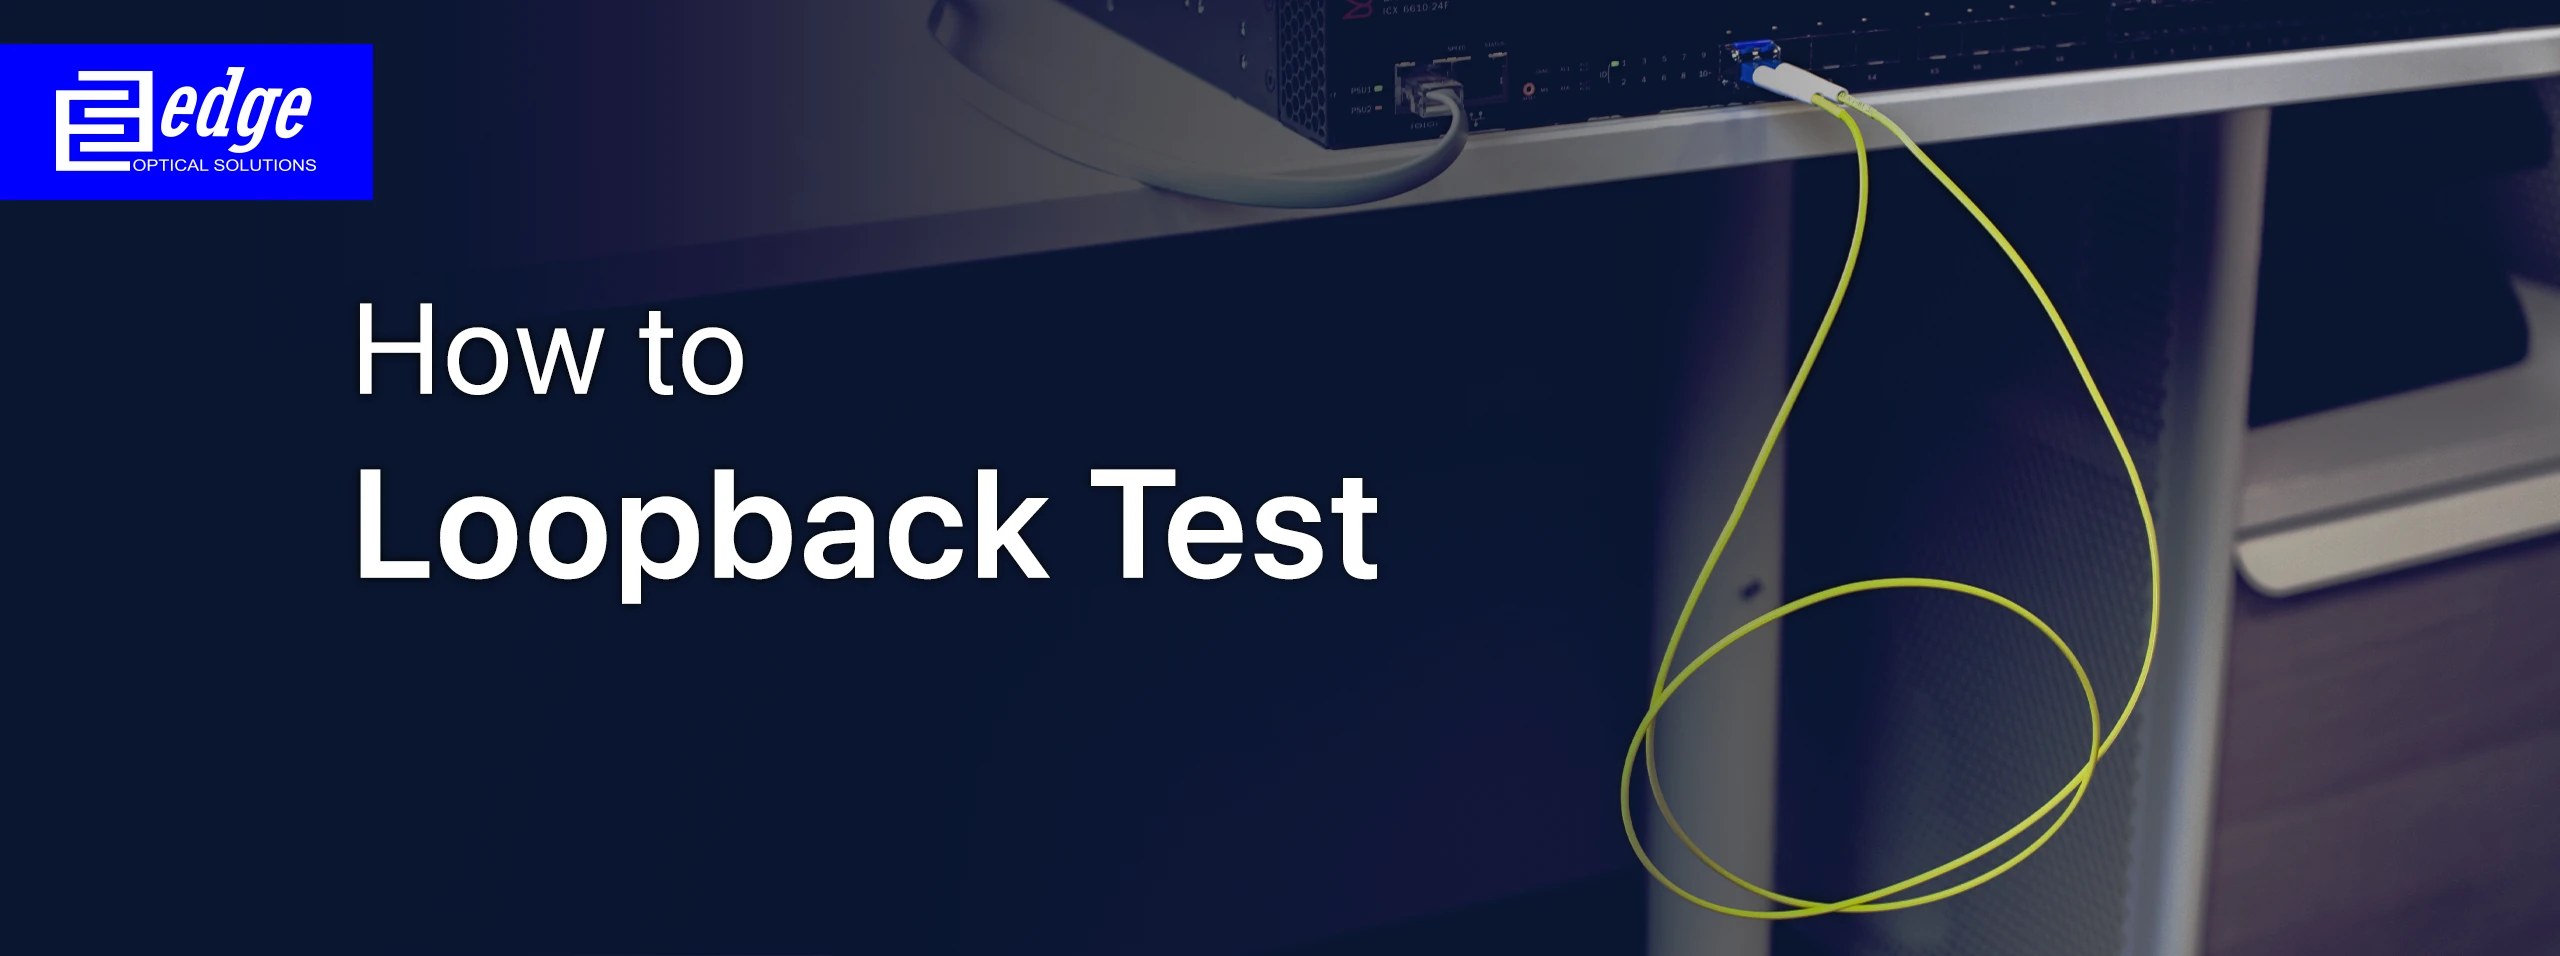 how to perform a loopback test